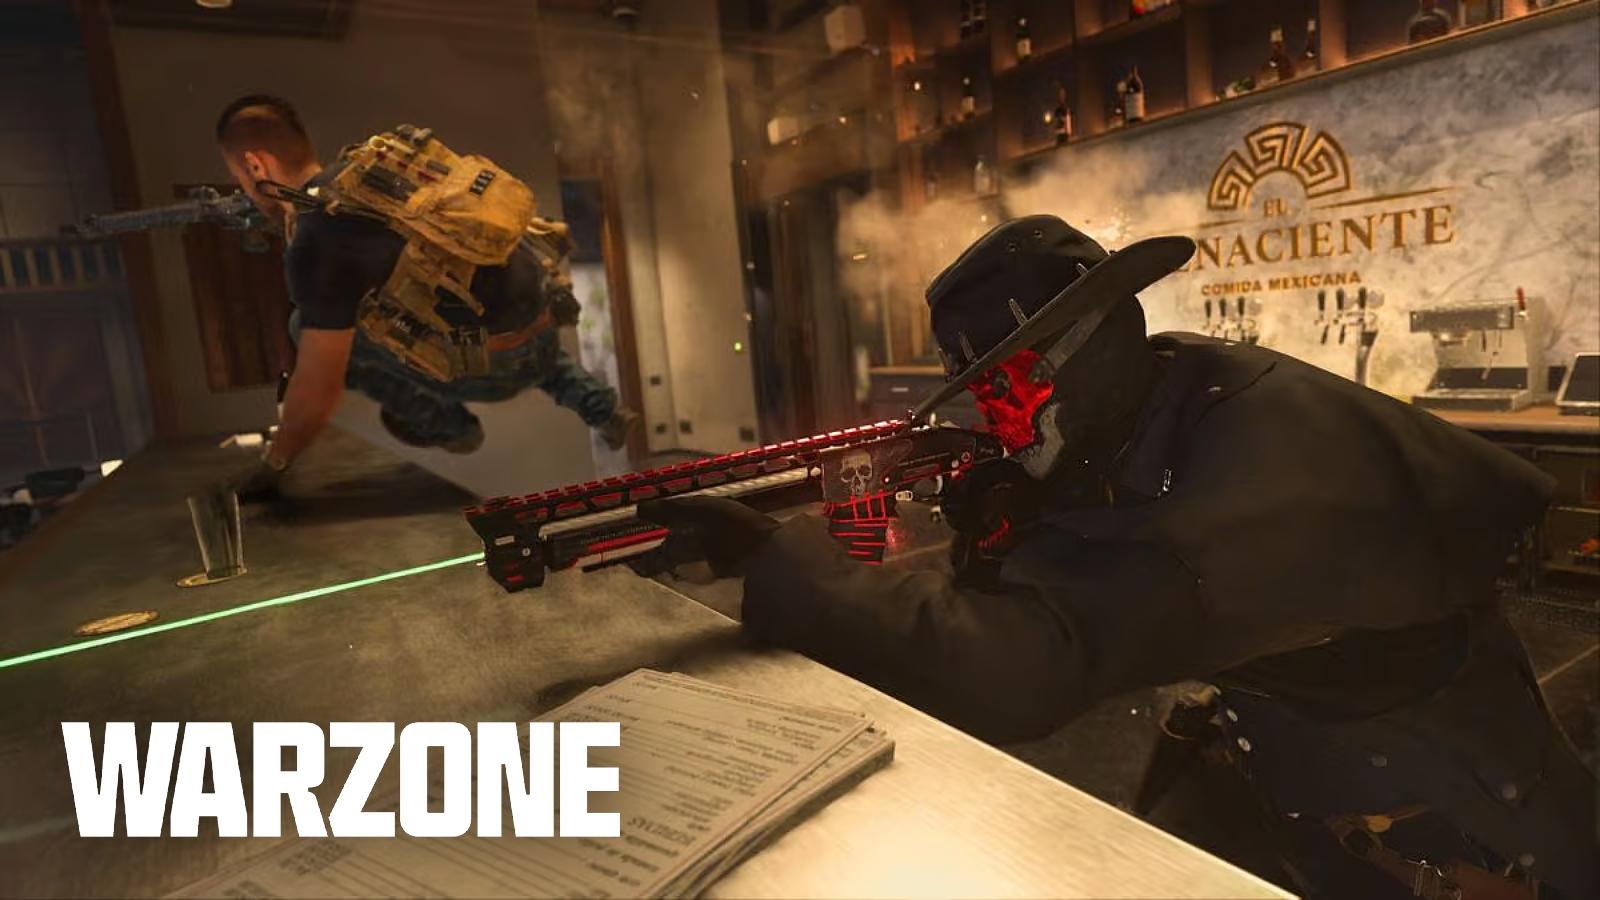 Warzone players aiming in with laser attachment